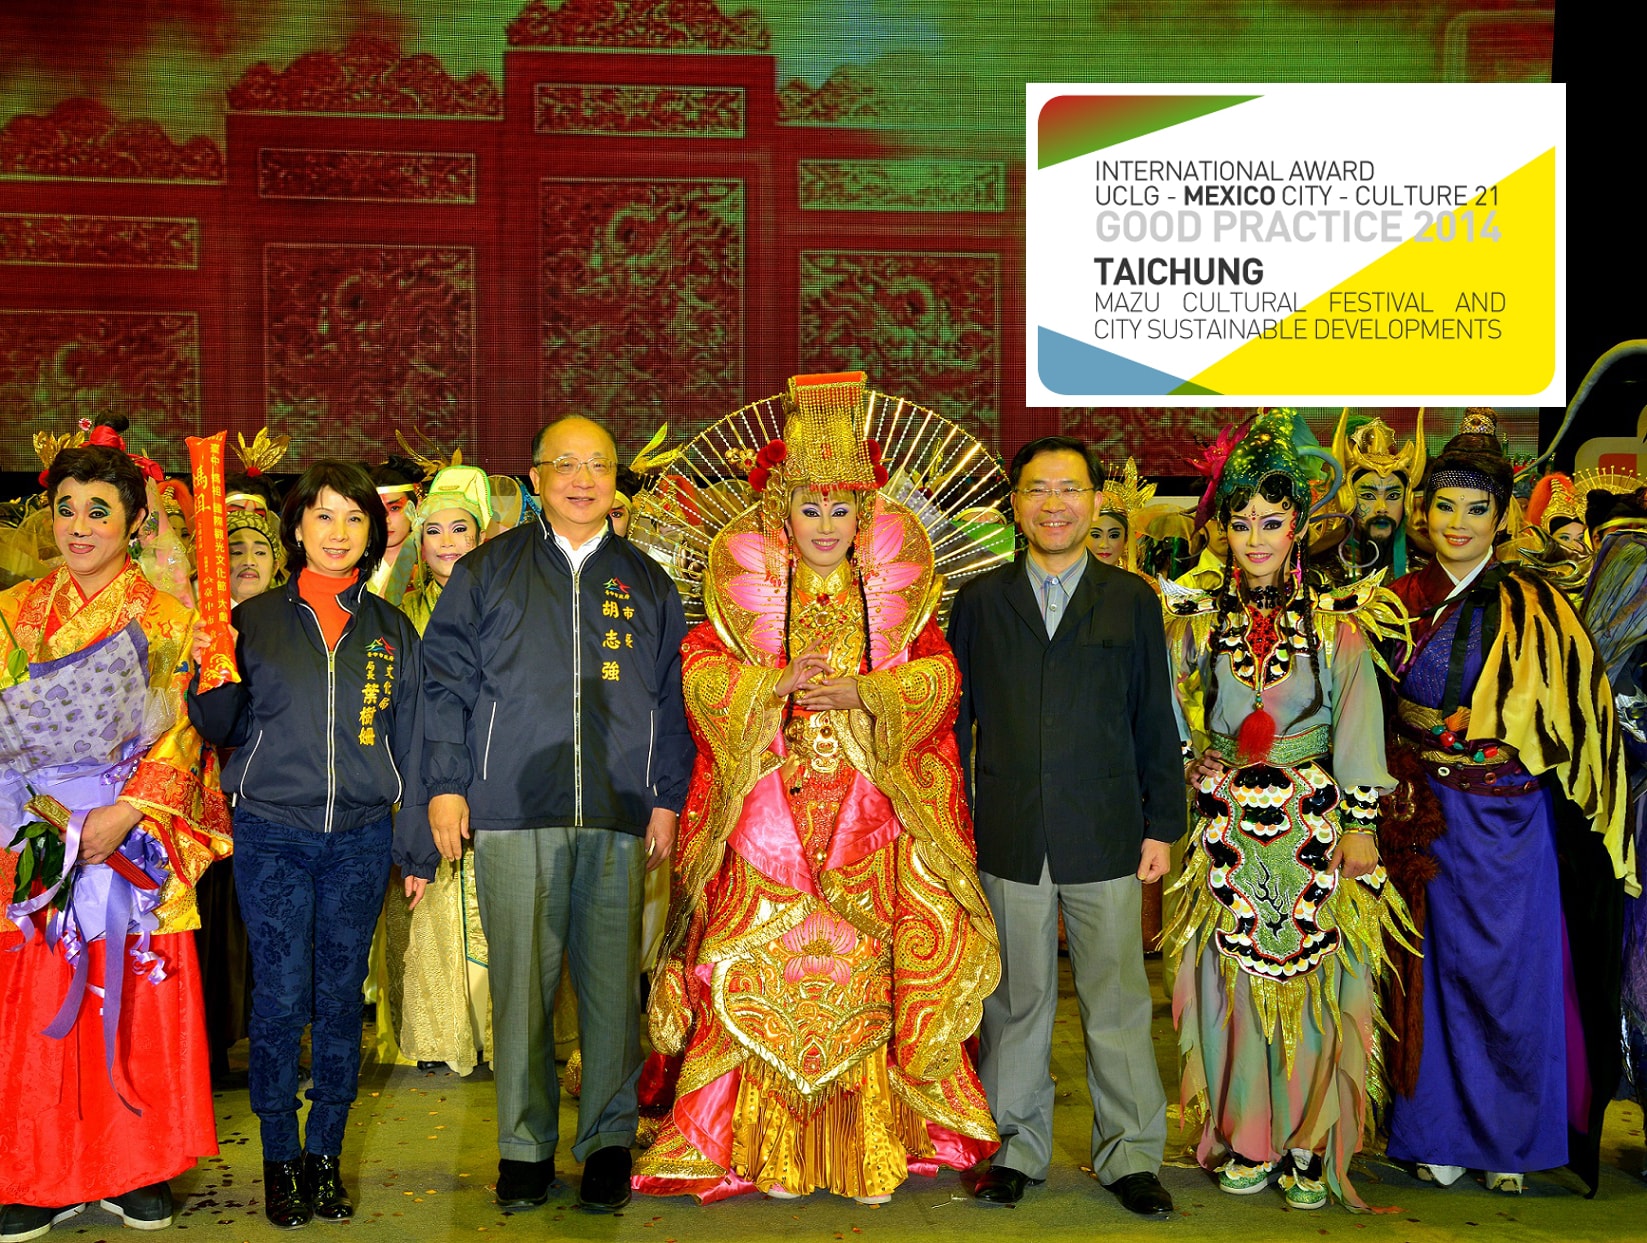 Mazu cultural festival and city sustainable development in Taichung 